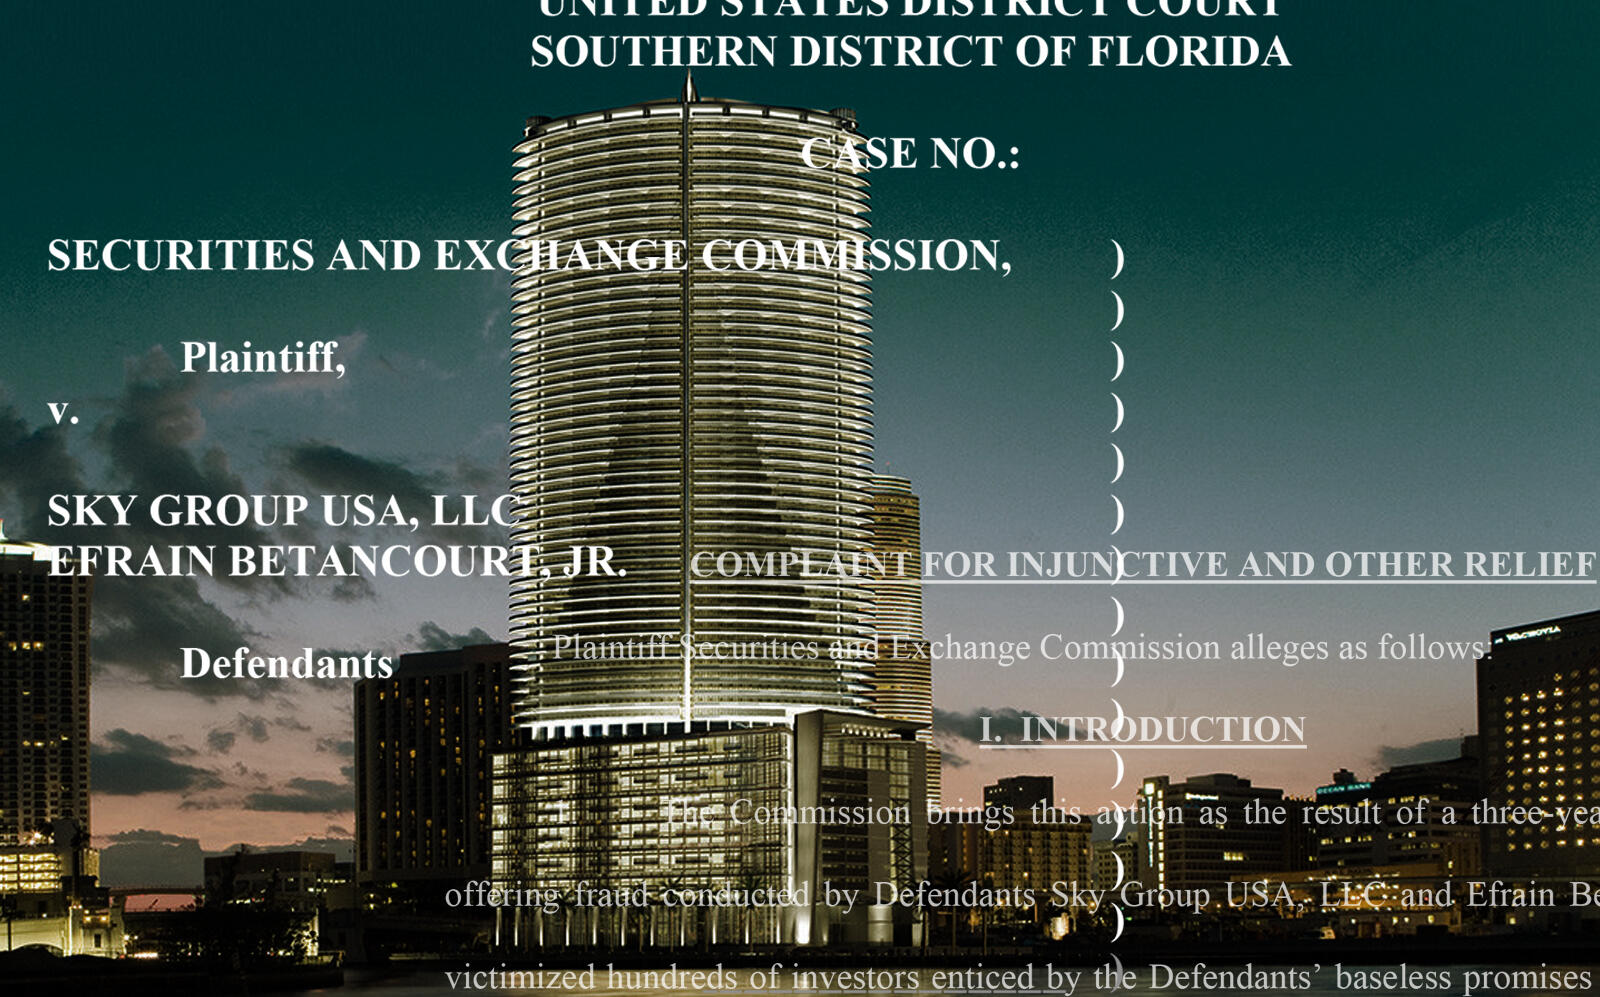 Epic Residences & Hotel with parts of the SEC complaint (Epic, United States District Court)